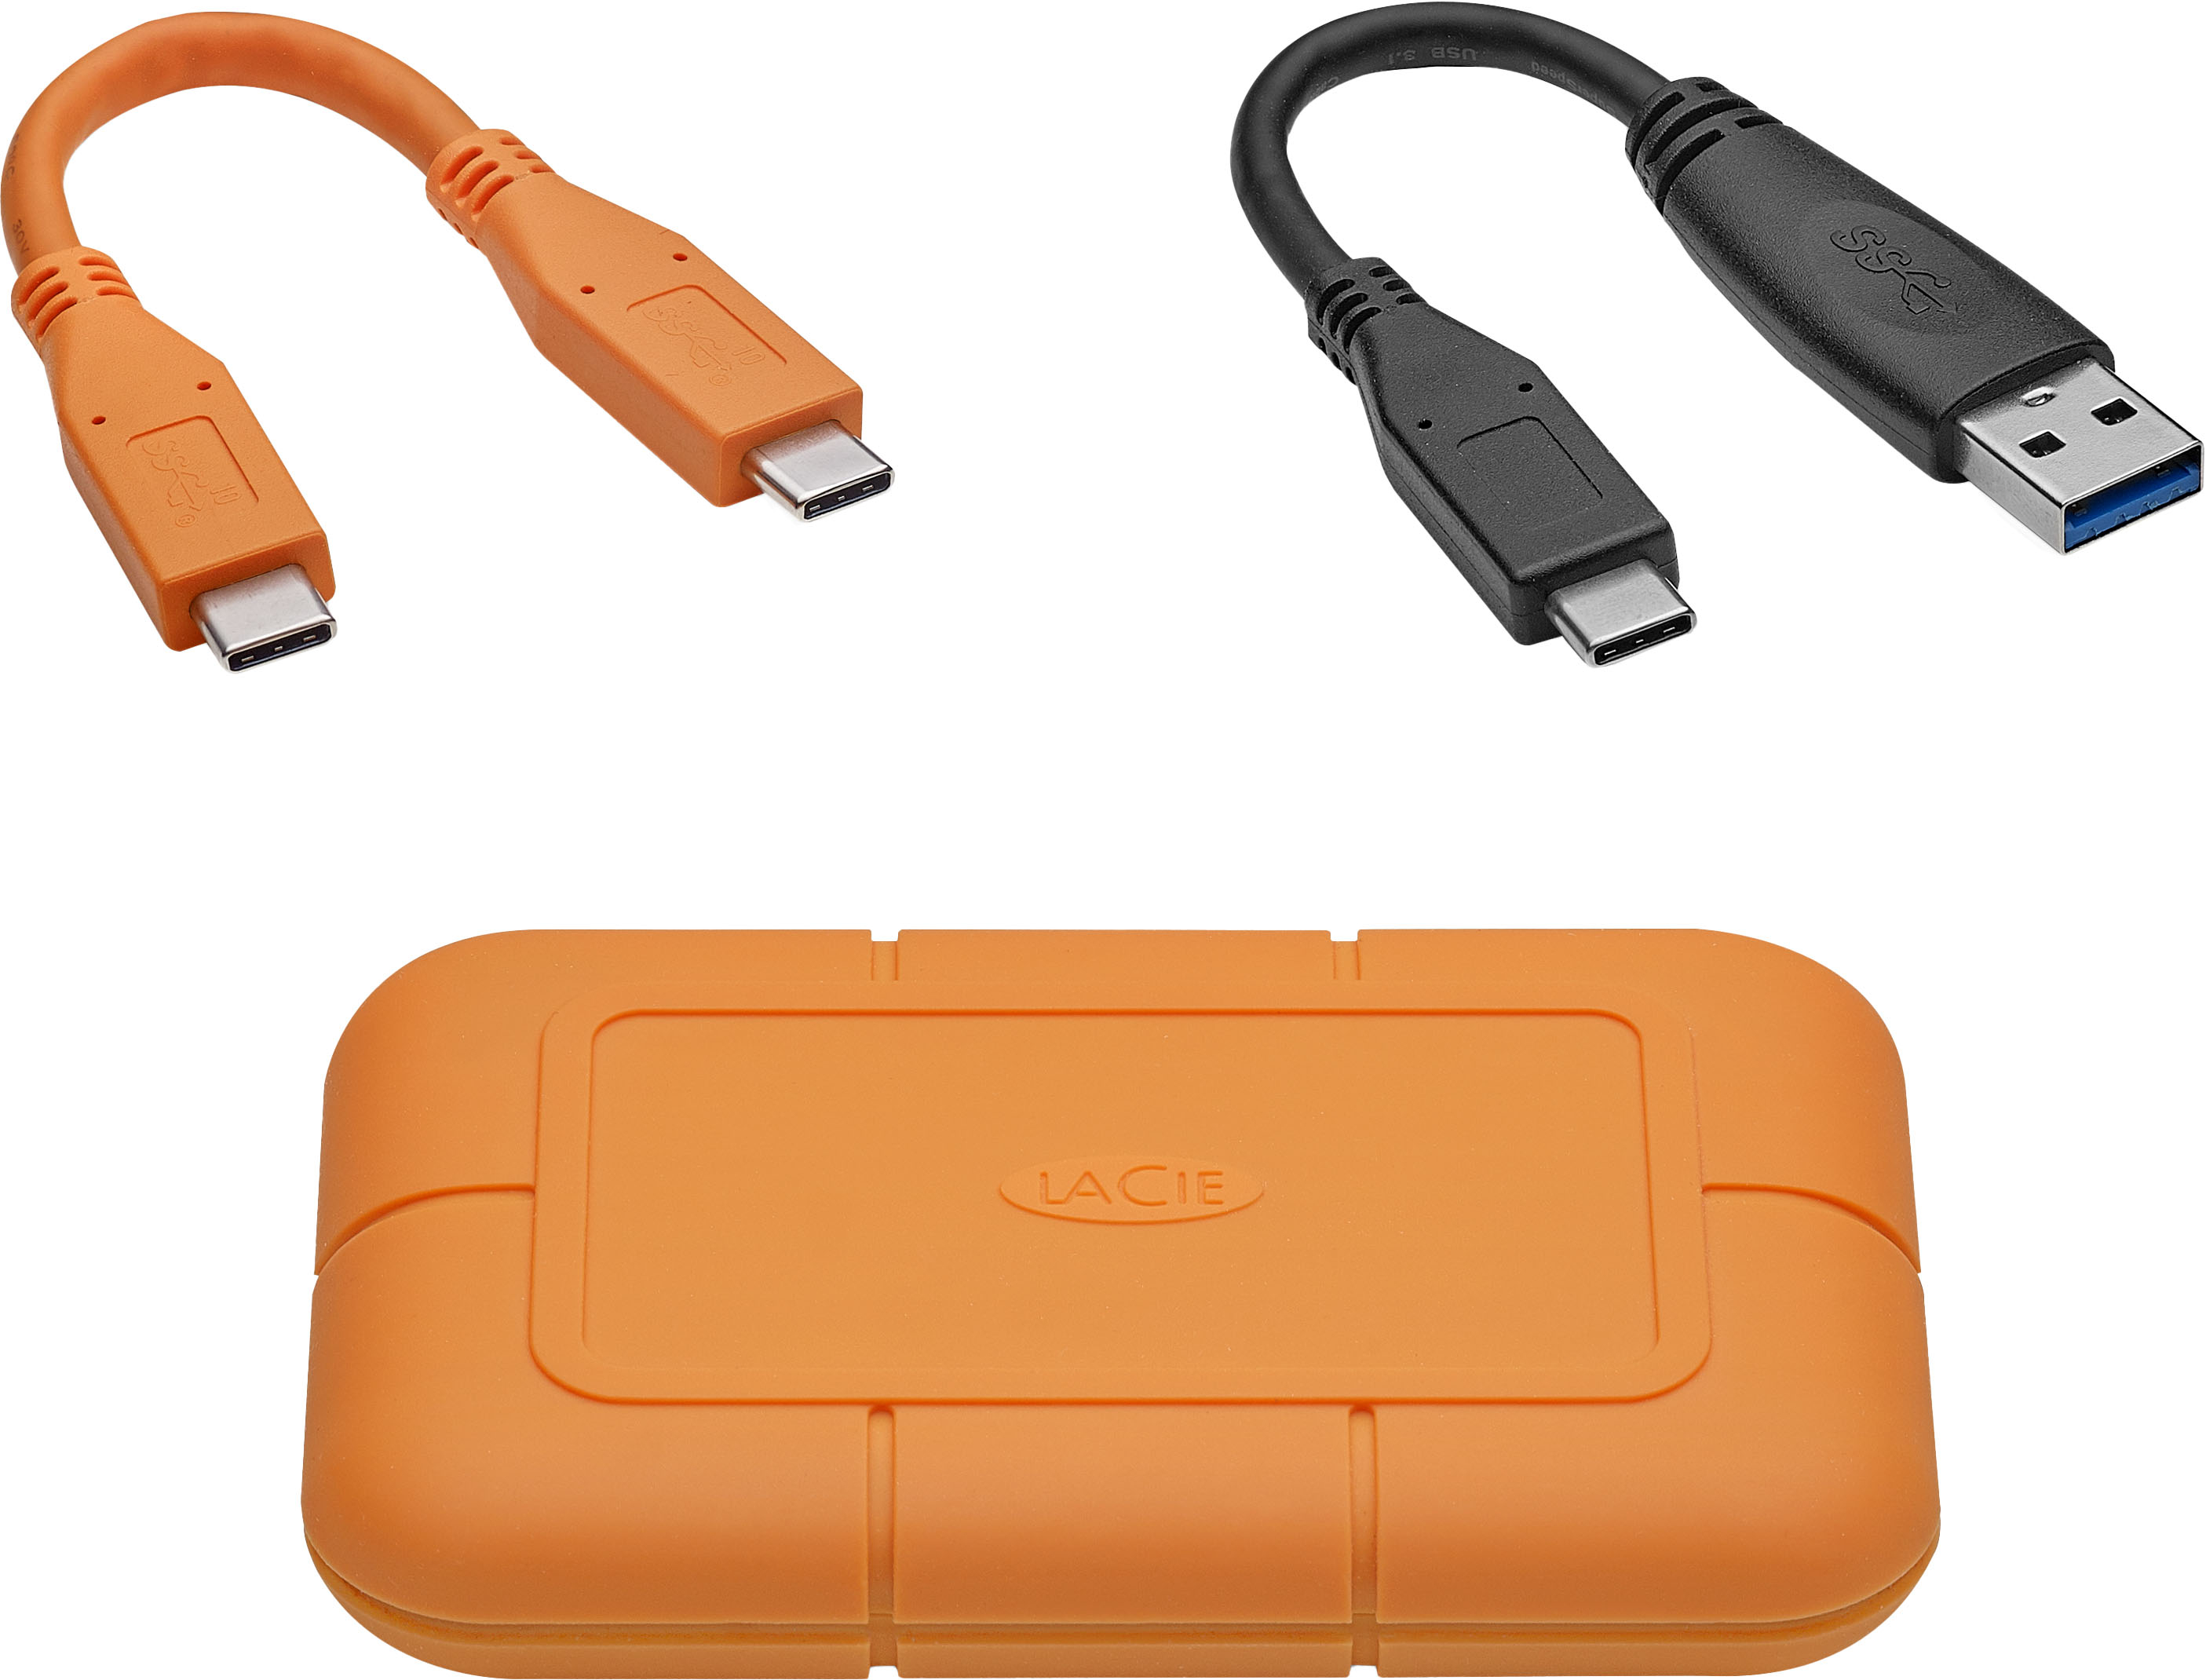 Ubevæbnet depositum vand Best Buy: LaCie Rugged 4TB External USB-C, USB 3.2 Portable SSD with Rescue  Data Recovery Services Orange STHR4000800